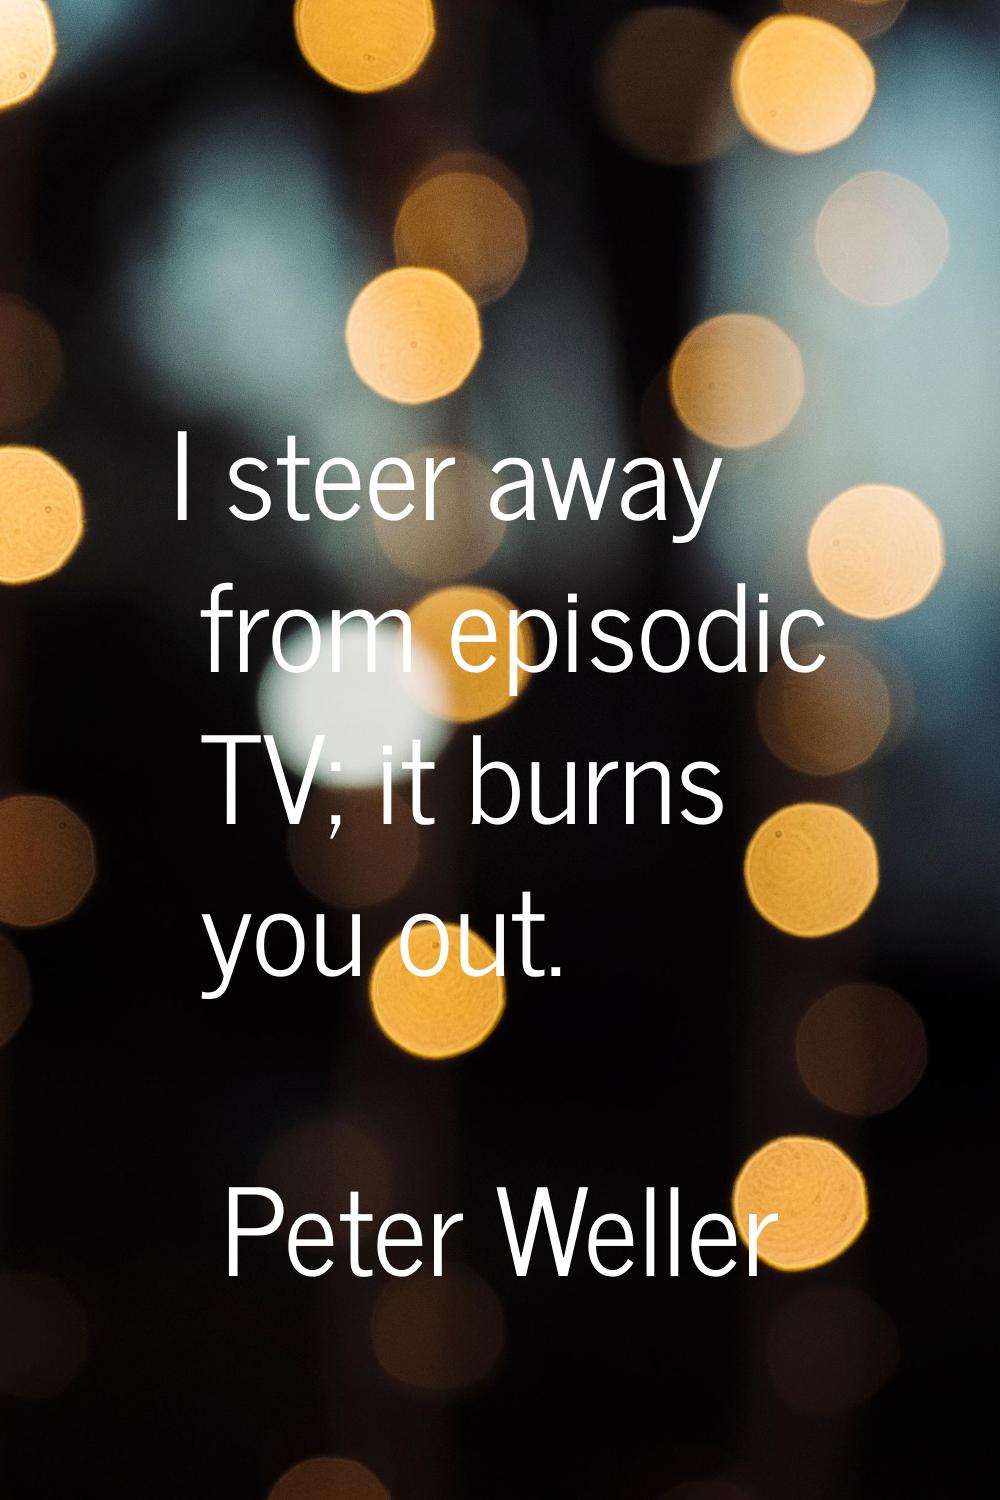 I steer away from episodic TV; it burns you out.